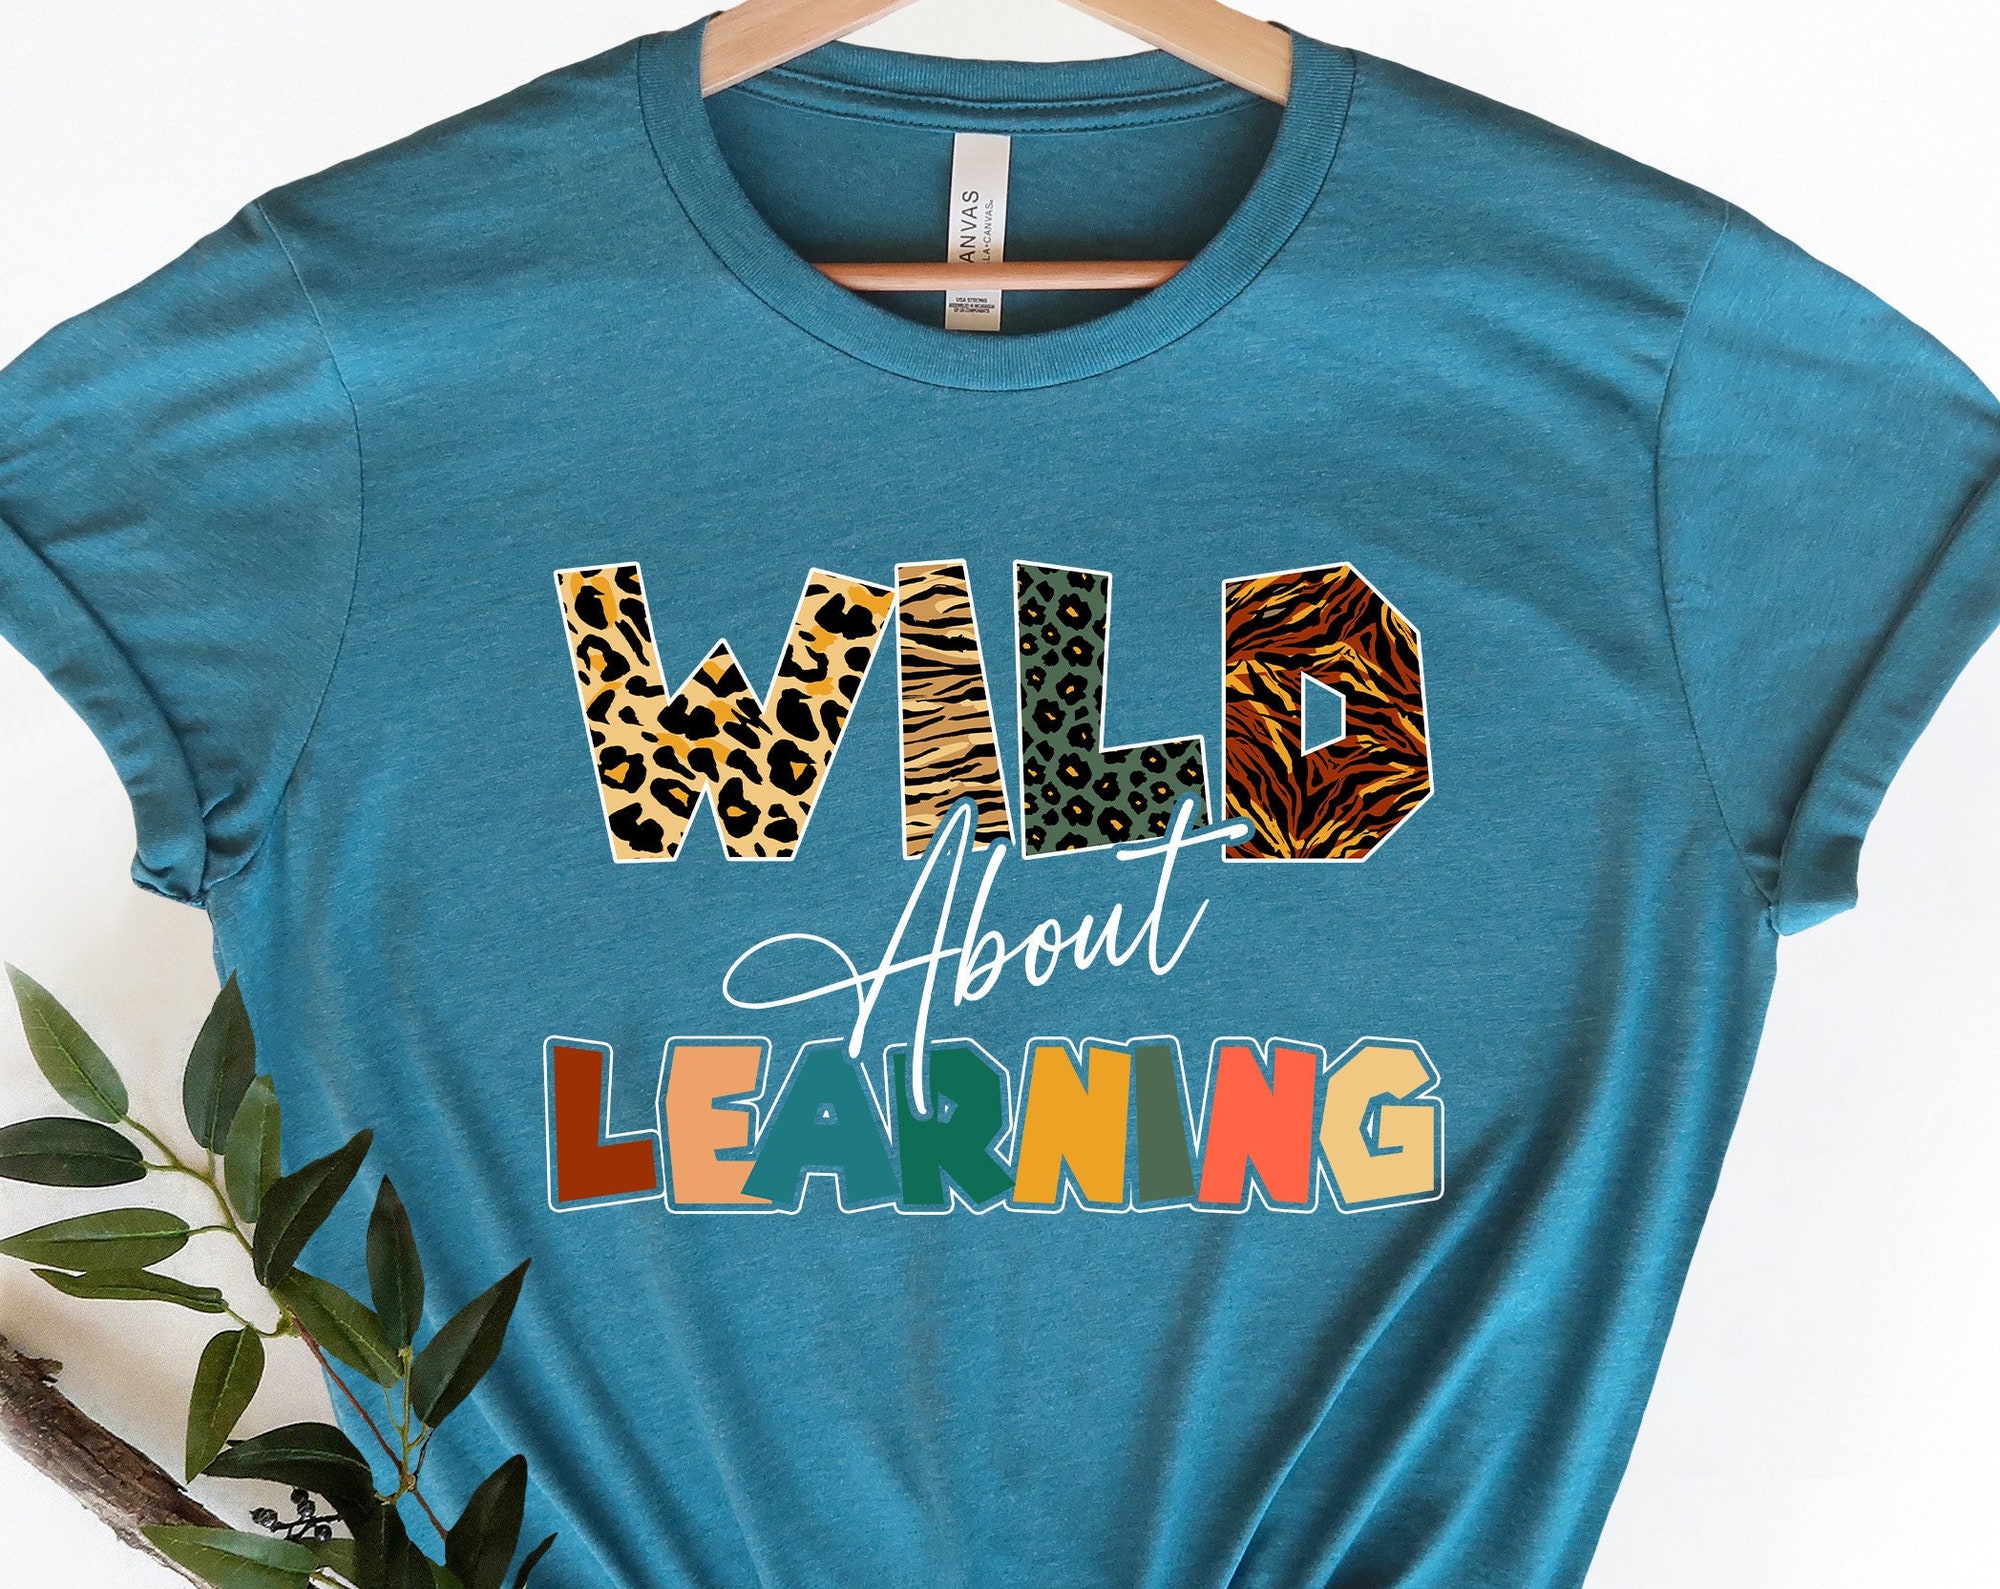 Wild About Learning At School Shirt